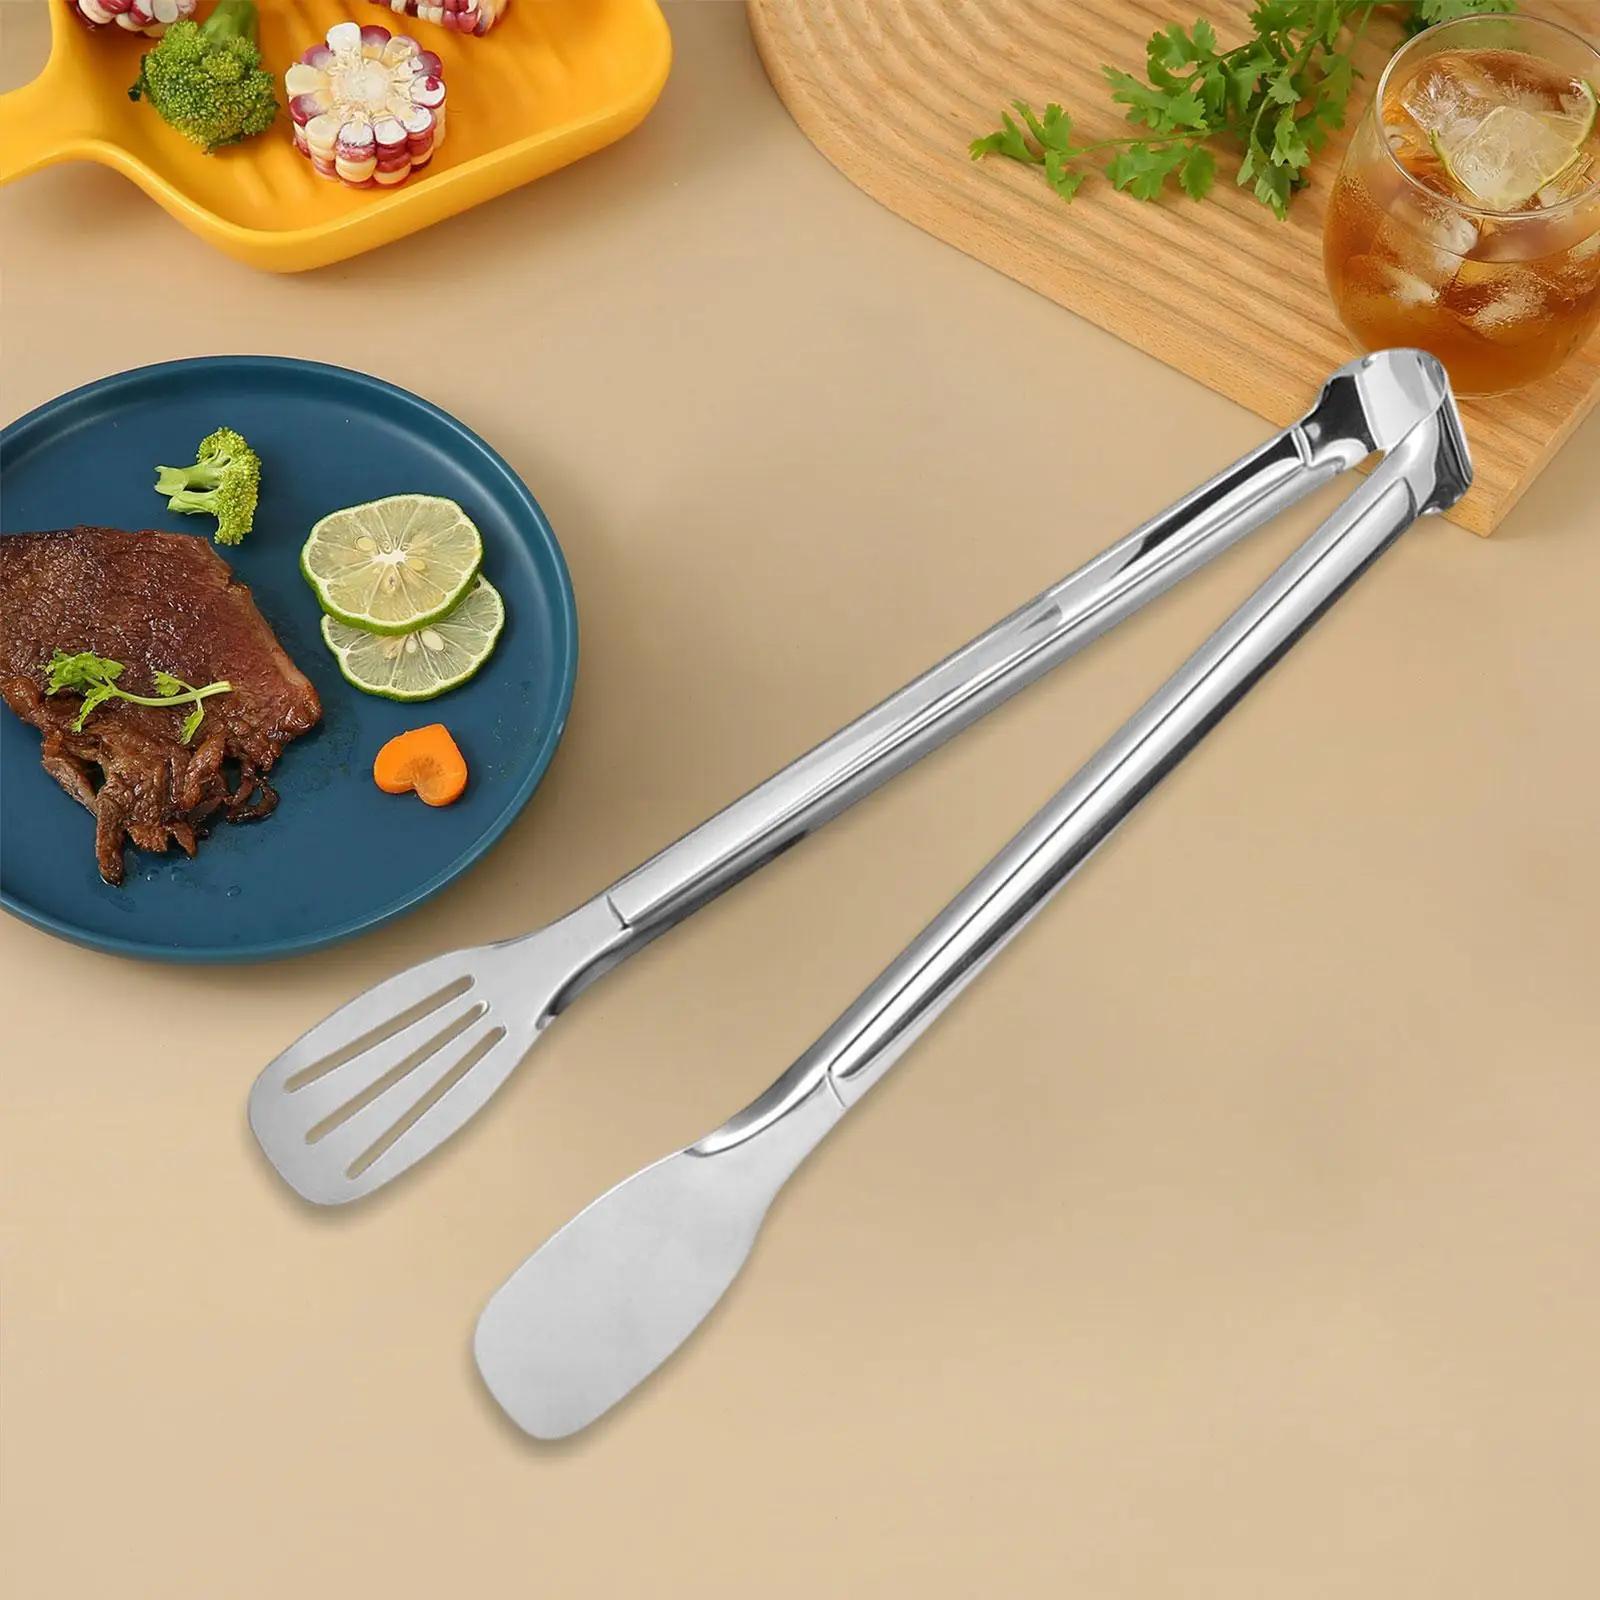 Stainless Steel Cooking Tongs Portable Bread Clip Buffet Tongs Sugar Tongs Small Kitchen Tongs for Party BBQ Grillin